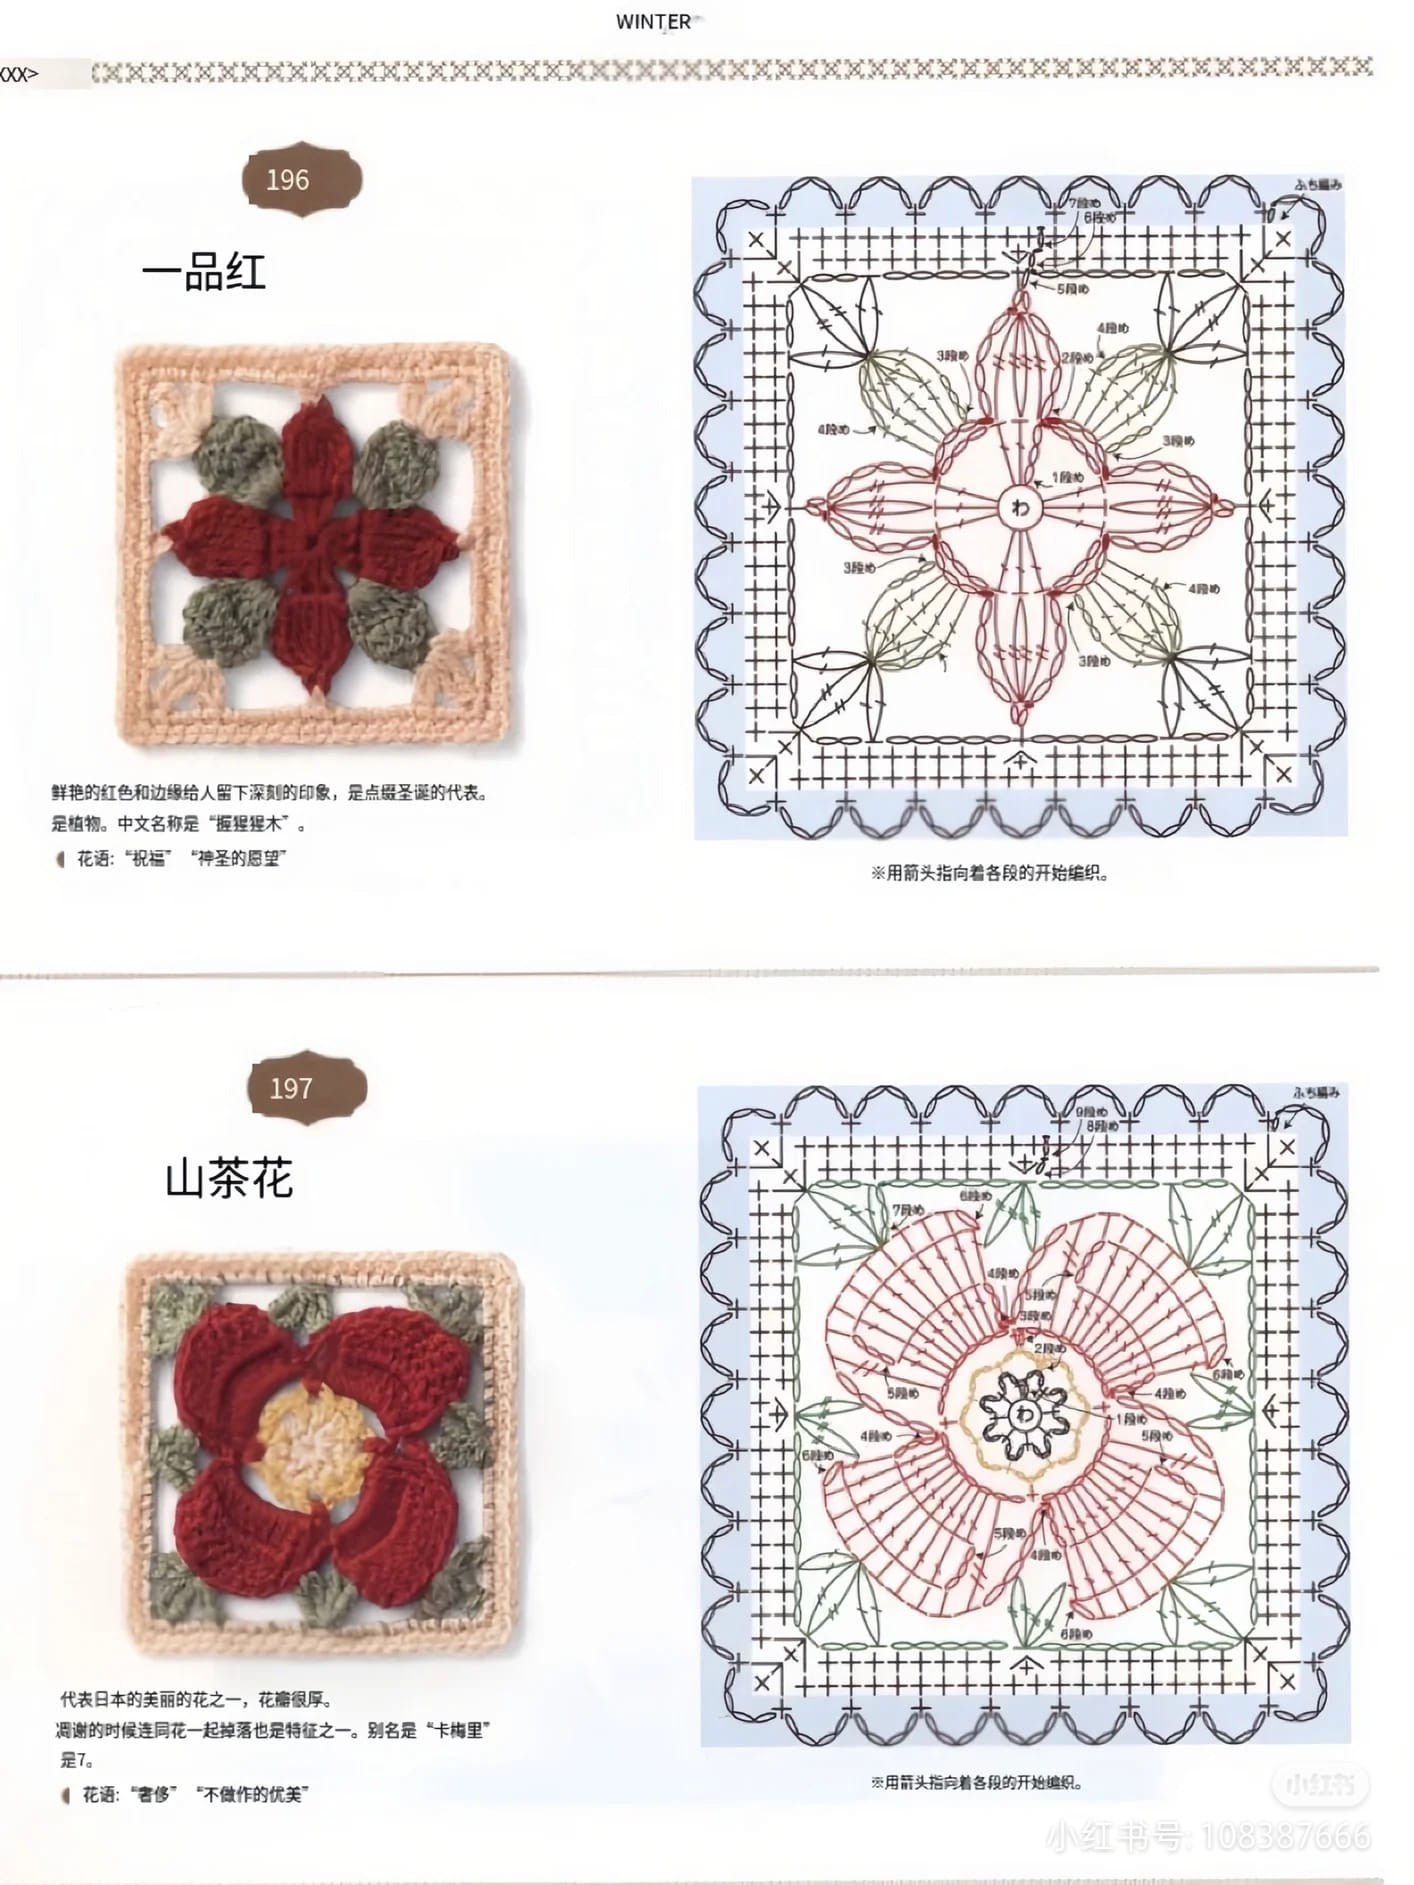 Crochet pattern for square patterned tablecloth